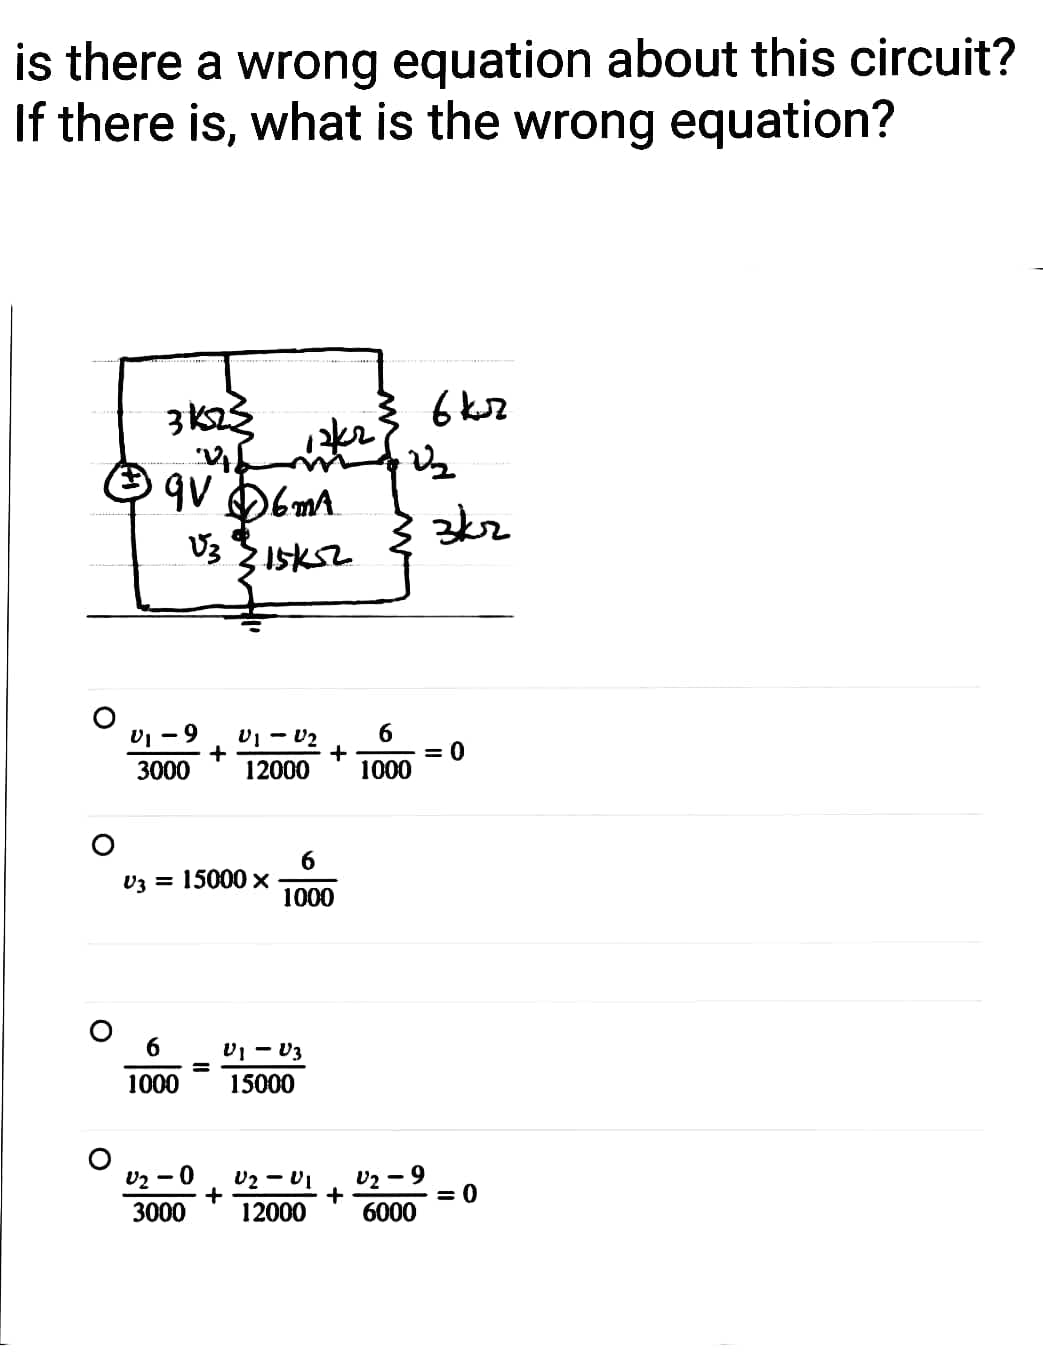 is there a wrong equation about this circuit?
If there is, what is the wrong equation?
3K25
2246
qVD6 MA
√3
315K5.2
V₁-9
3000 12000
6
1000
+
V3 = 15000 x
=
U2 0
3000
V1 V₂
+
VI-V3
15000
+
6
1000
22₂
6
1000
вкл
U2 - V1
U₂ - 9
+
12000 6000
3kr
0
= 0